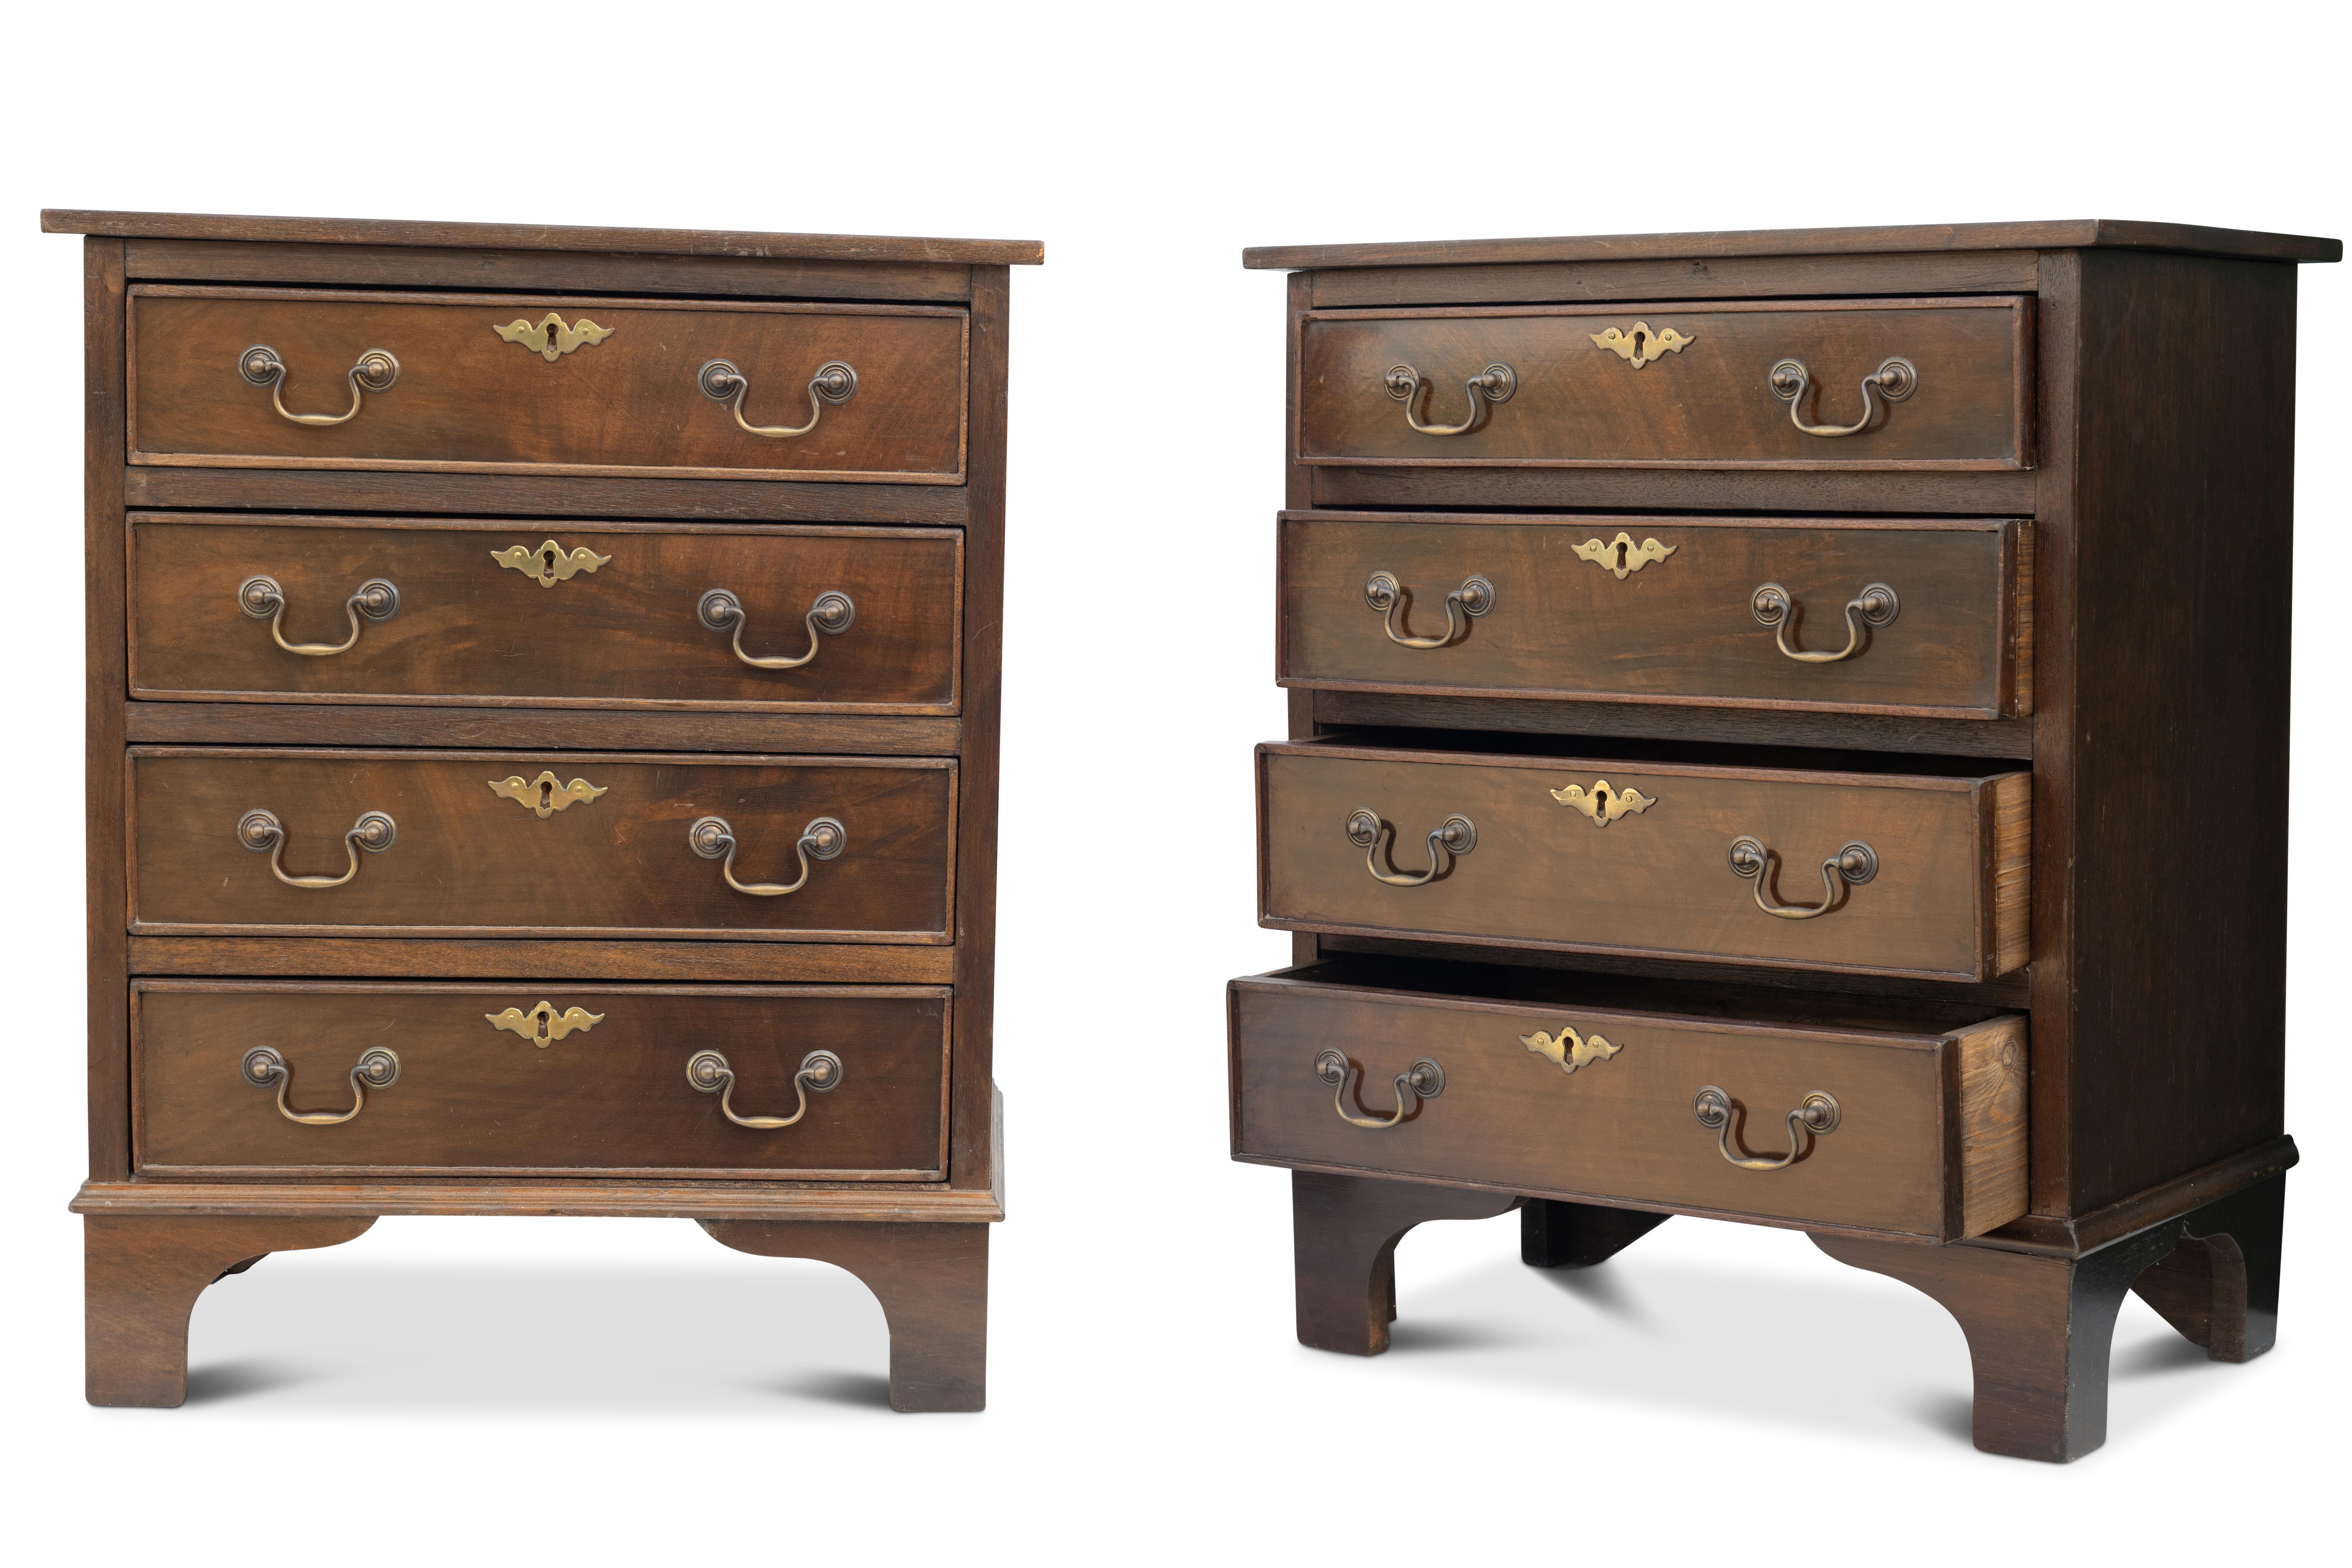 Stained Georgian Design Pair of Antique Bedside Chest of Drawers & Brass Batwing Handles For Sale